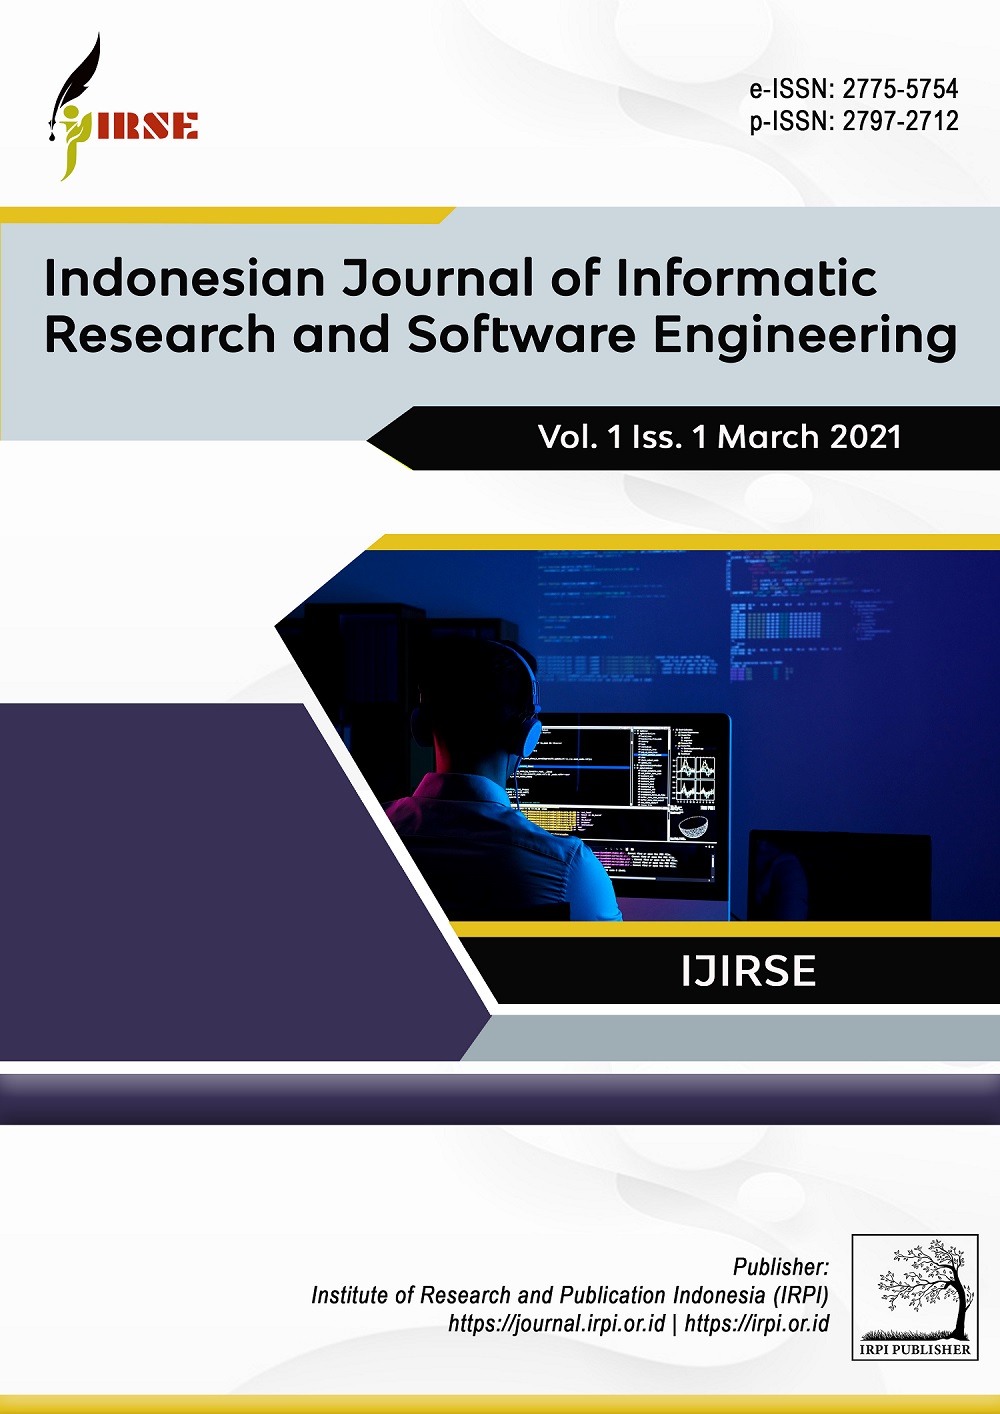 					Lihat Vol 2 No 2 (2022): Indonesian Journal of Informatic Research and Software Engineering
				